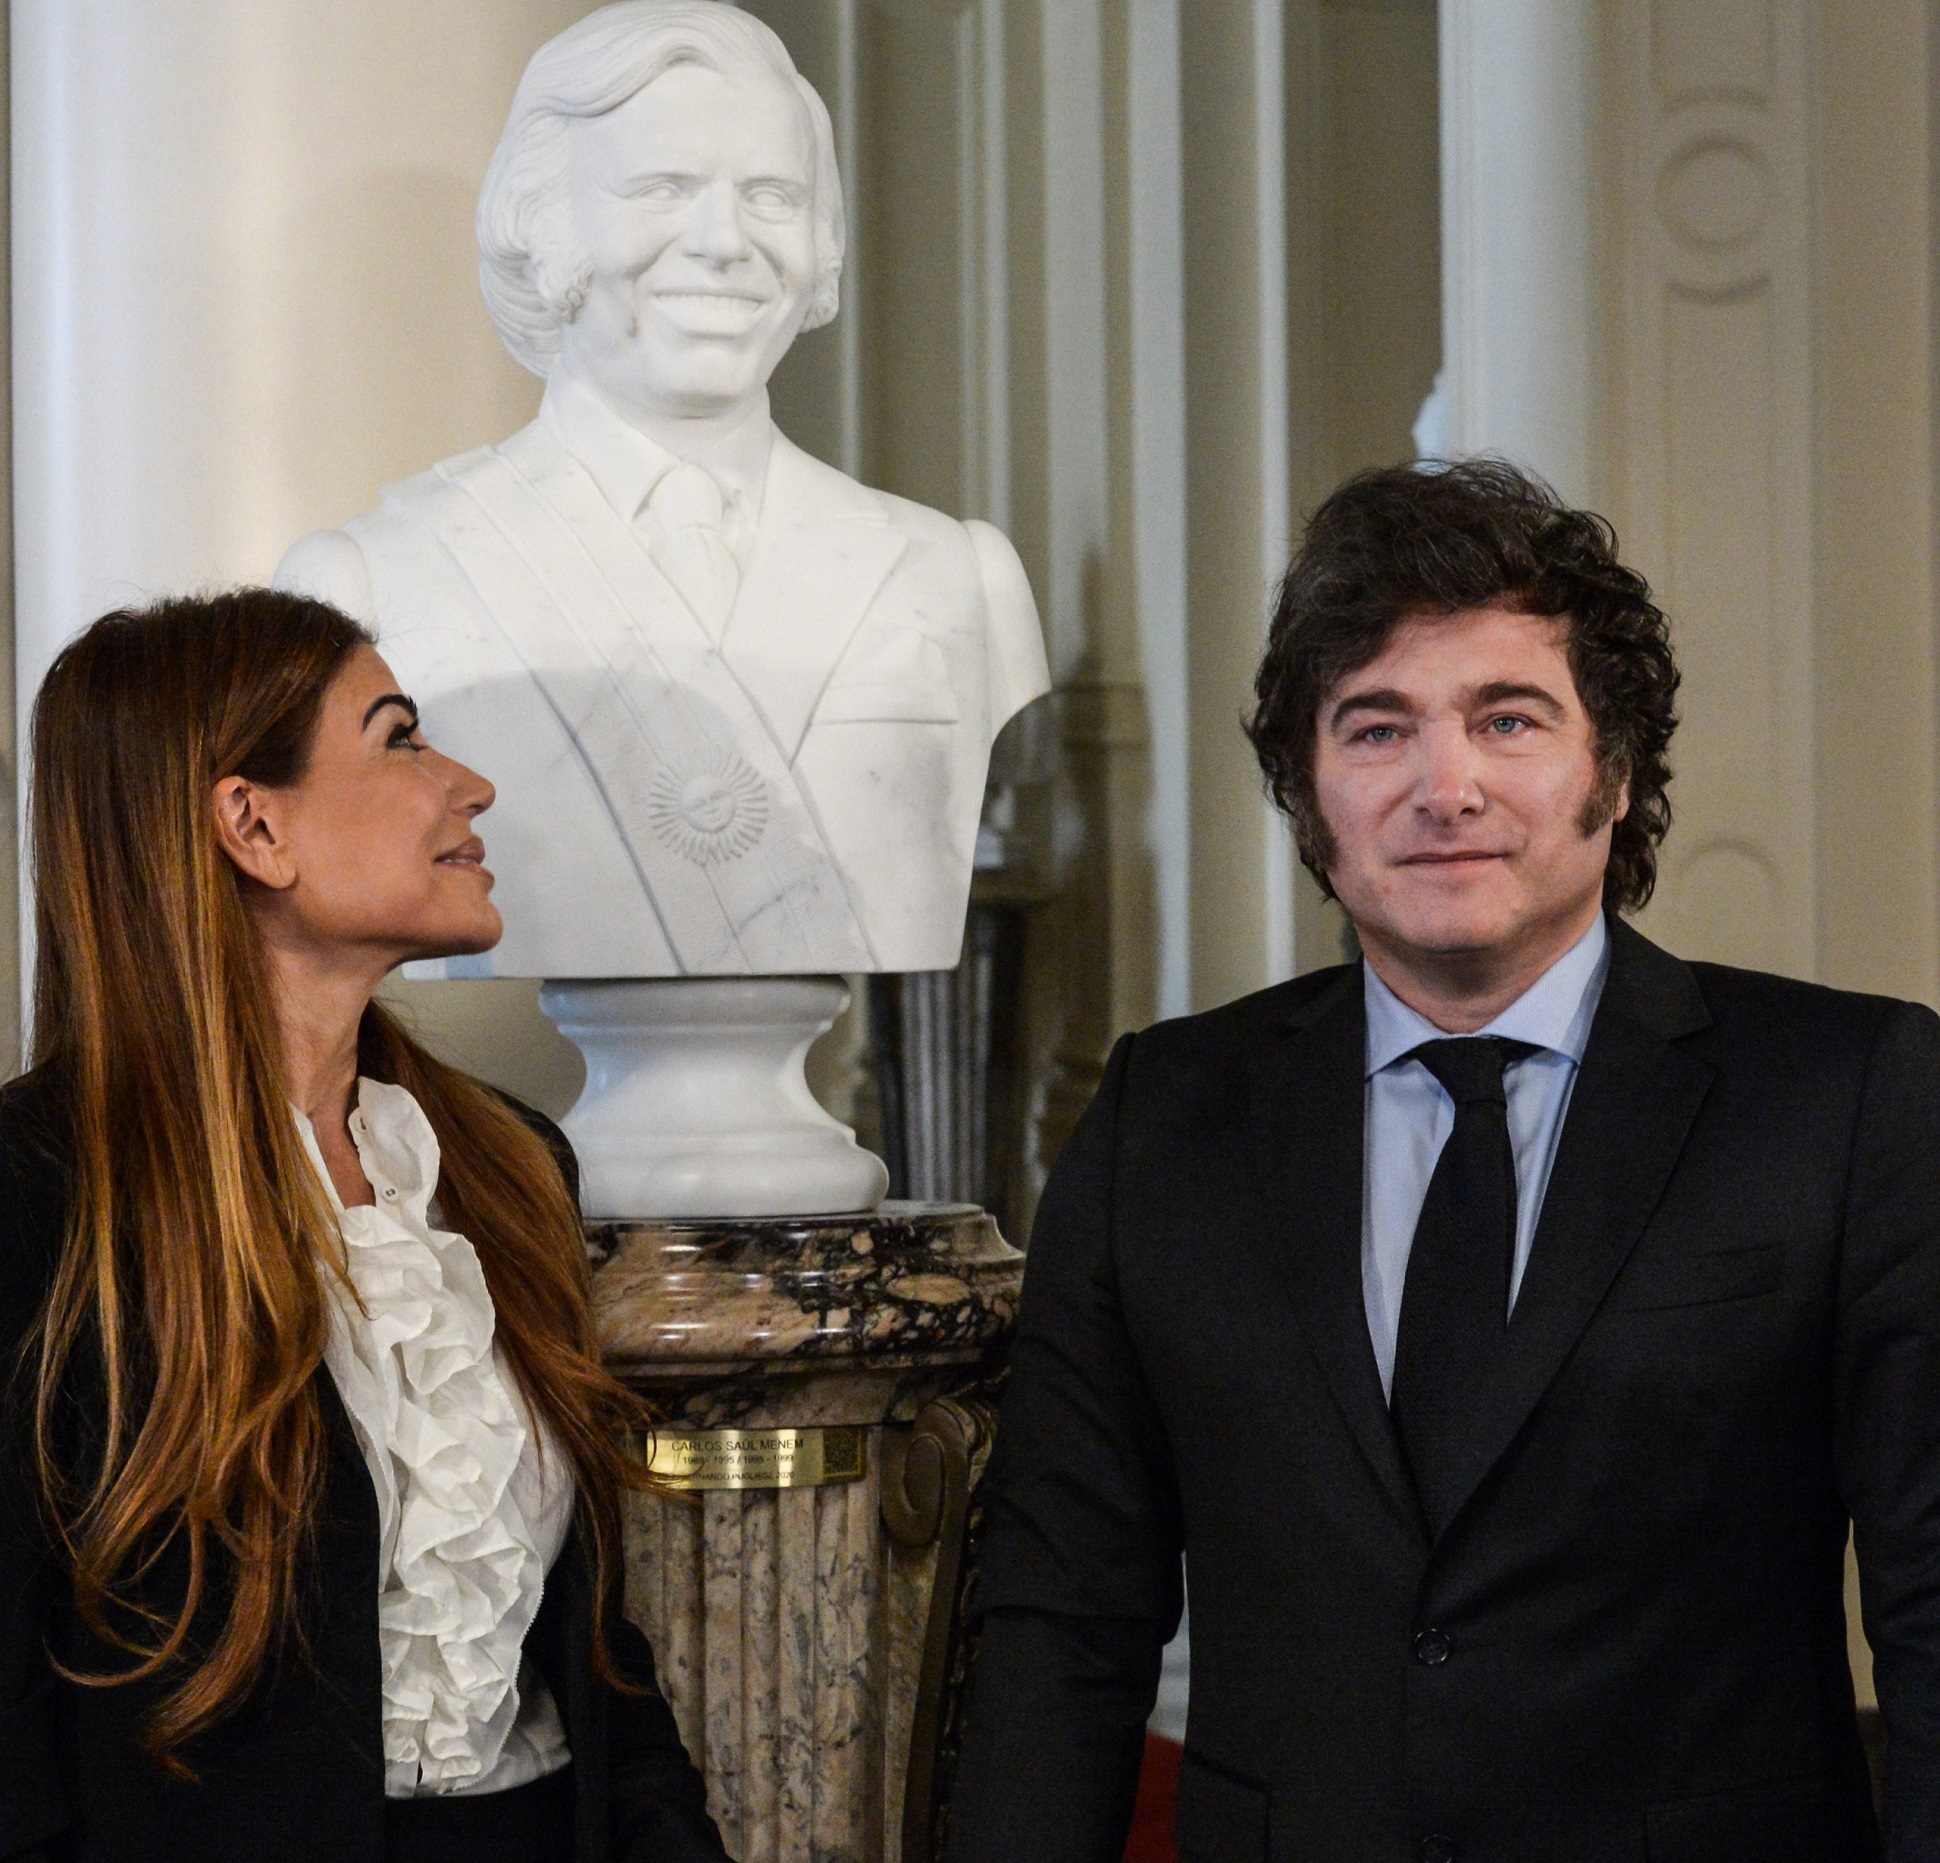 The National Government placed the presidential bust of Carlos Menem in the Casa Rosada's Hall of Honour